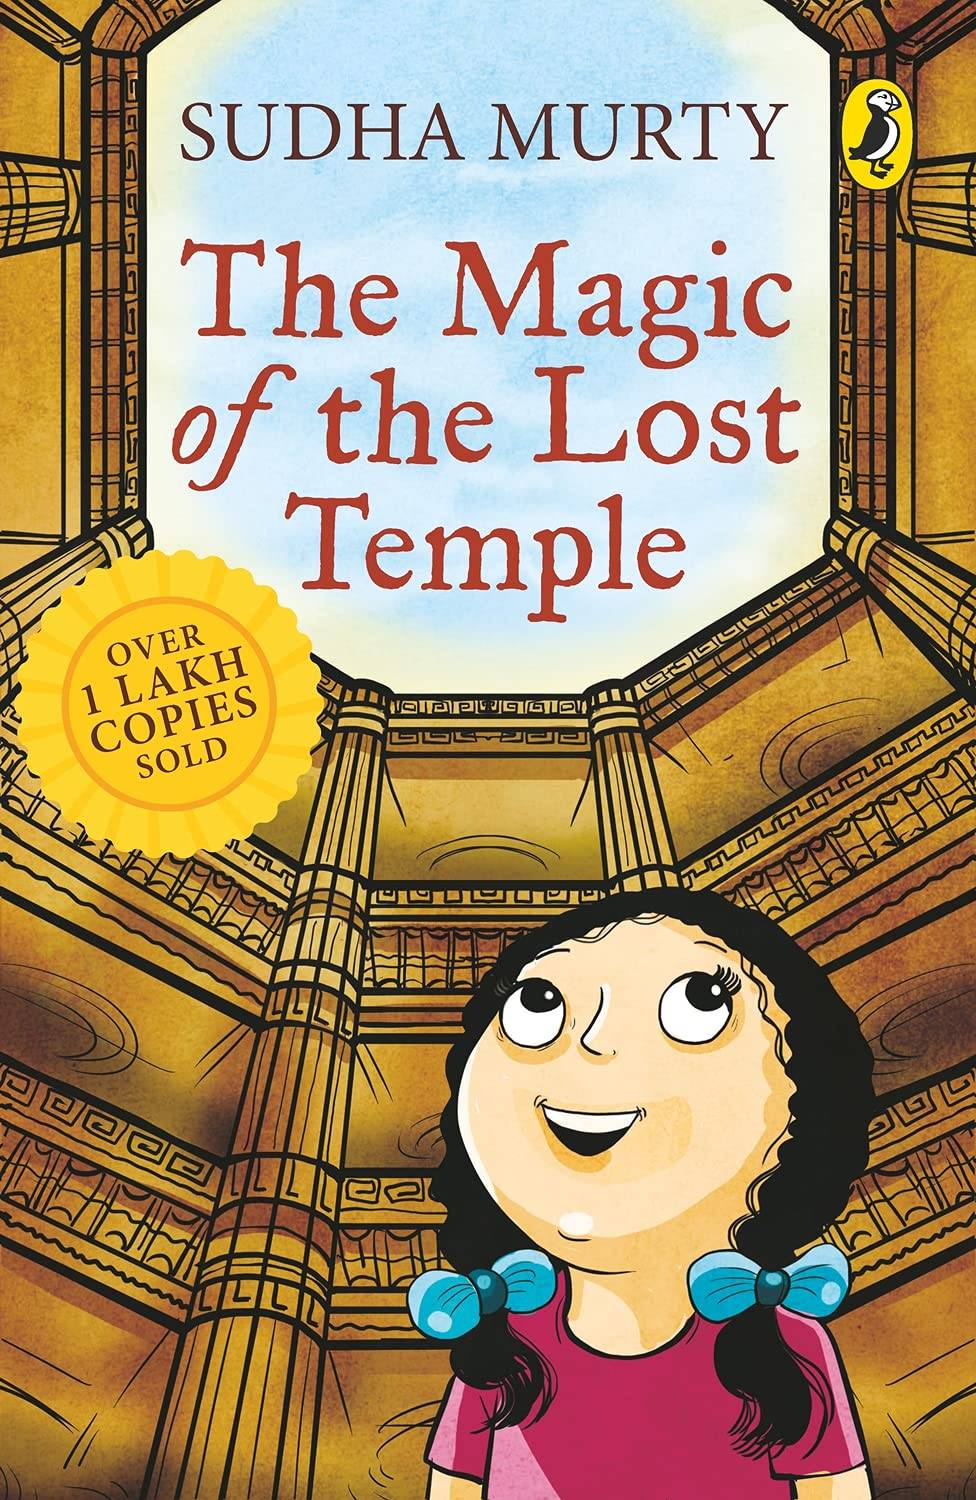 IMG : The magic of the lost temple